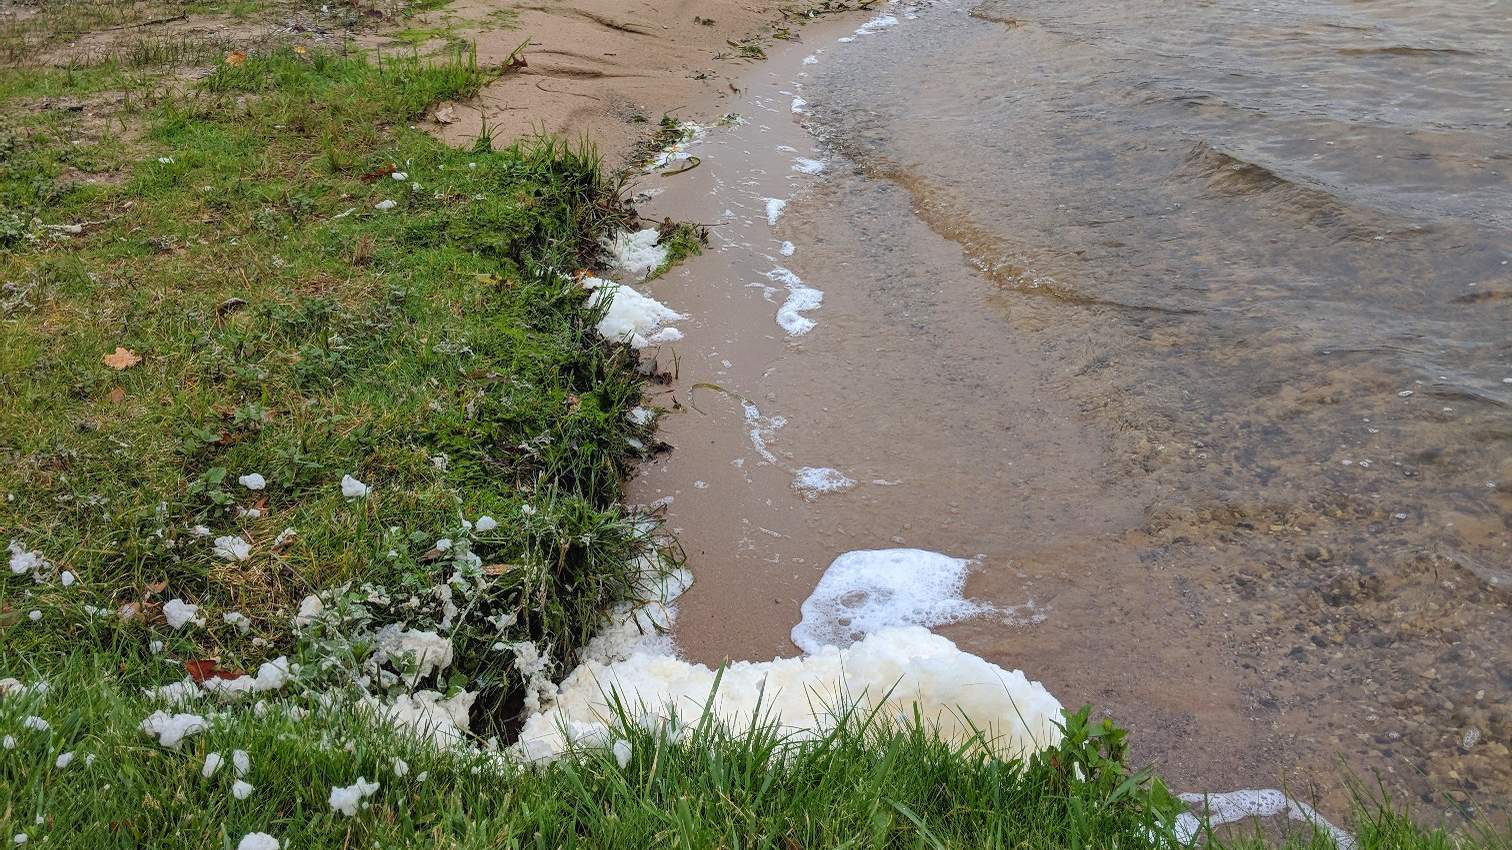 Health officials: Avoid foam on Michigan lakes, rivers with PFAS contamination